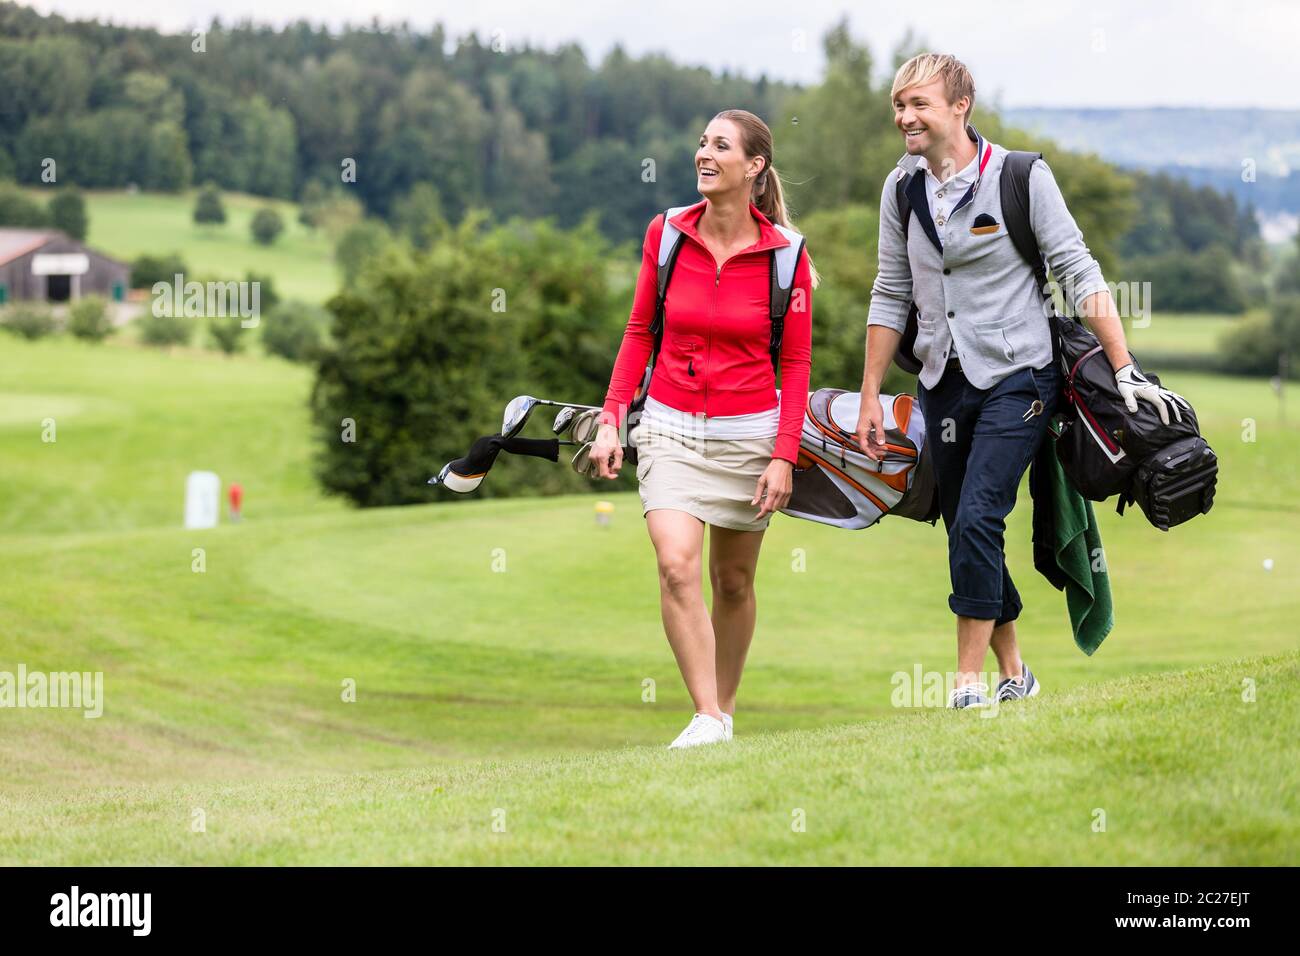 Happy sporty golfing couple walking together on golf course carrying their bags Stock Photo